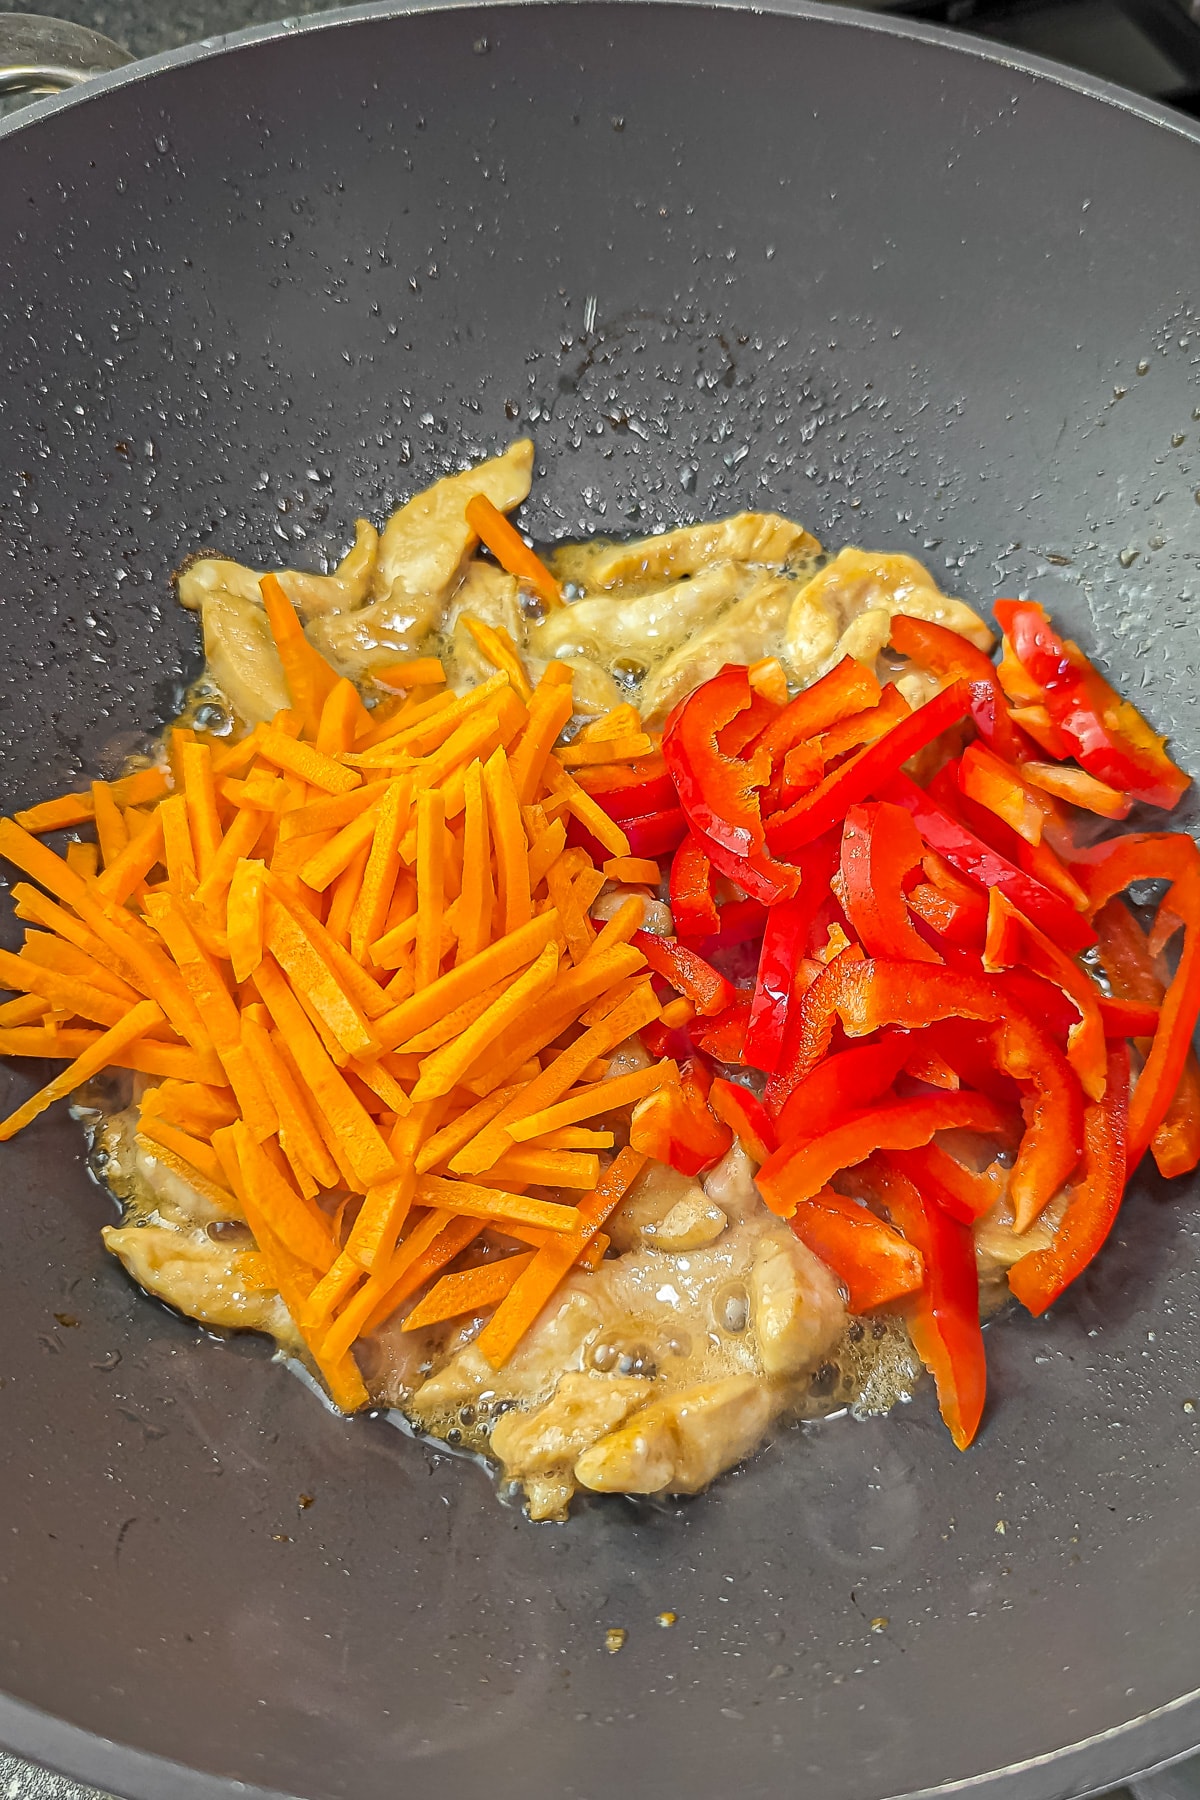 Cooked chicken in a pan with added sliced carrots and red bell pepper.